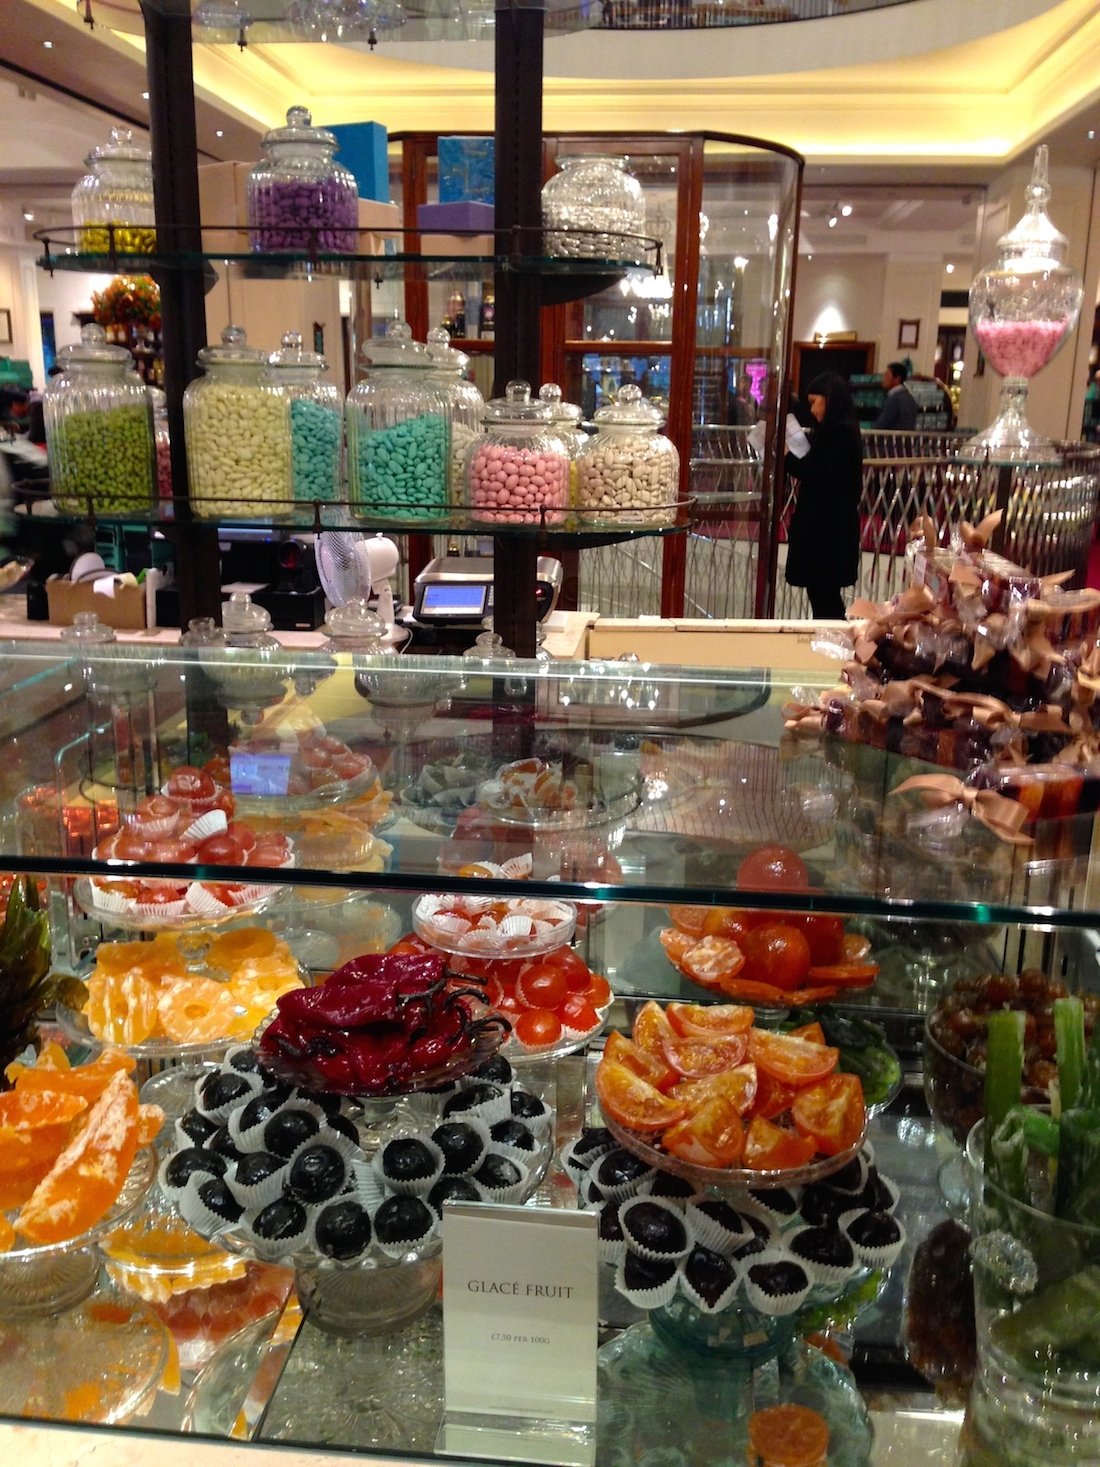 Fortnum & Mason's diabetes-inducing candy counter